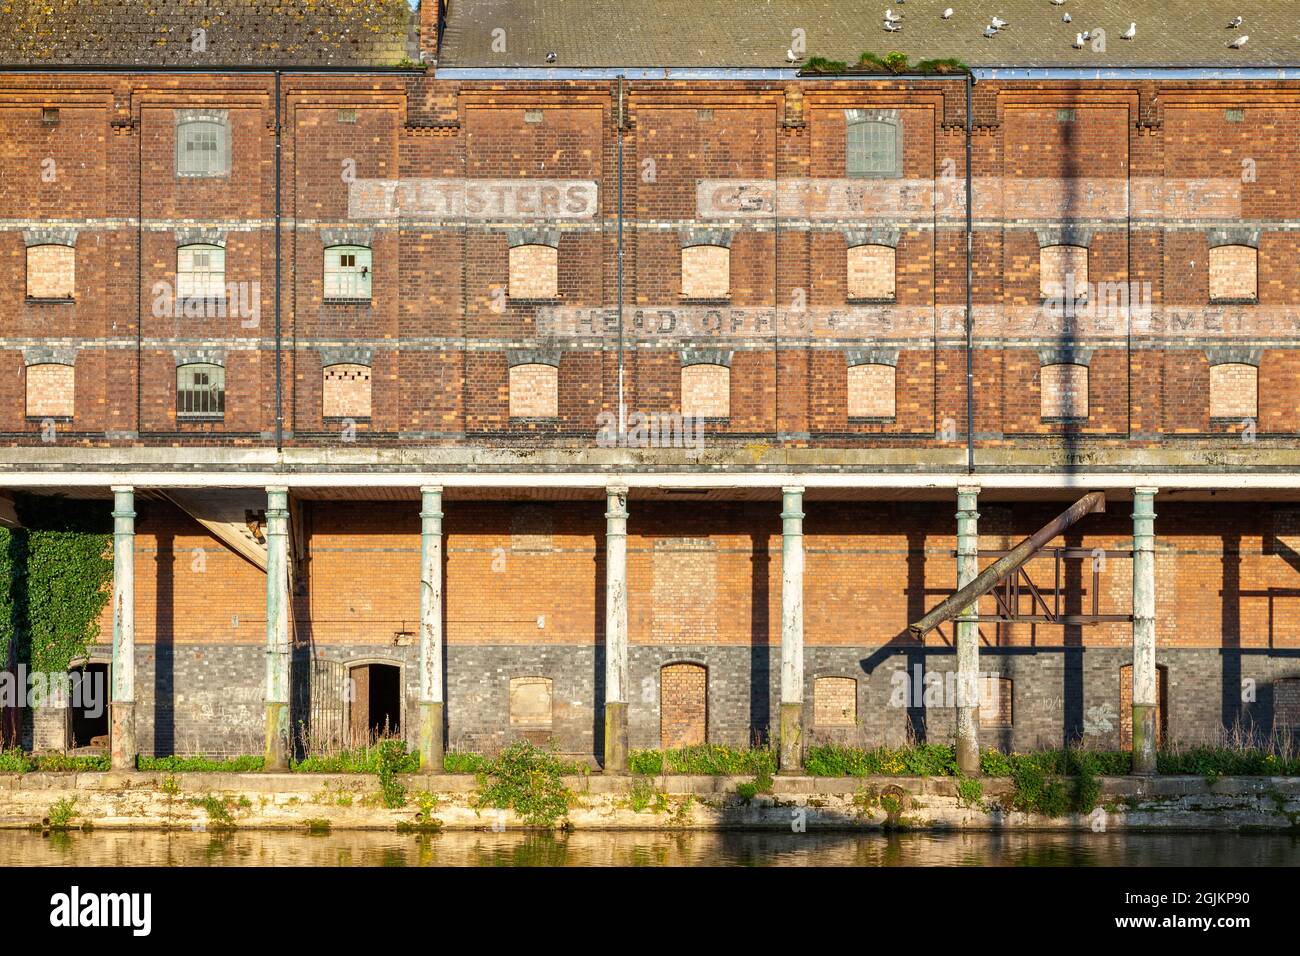 Downing's Malthouses, Bakers Quay, canal Sharpness, Gloucester docks Royaume-Uni Banque D'Images